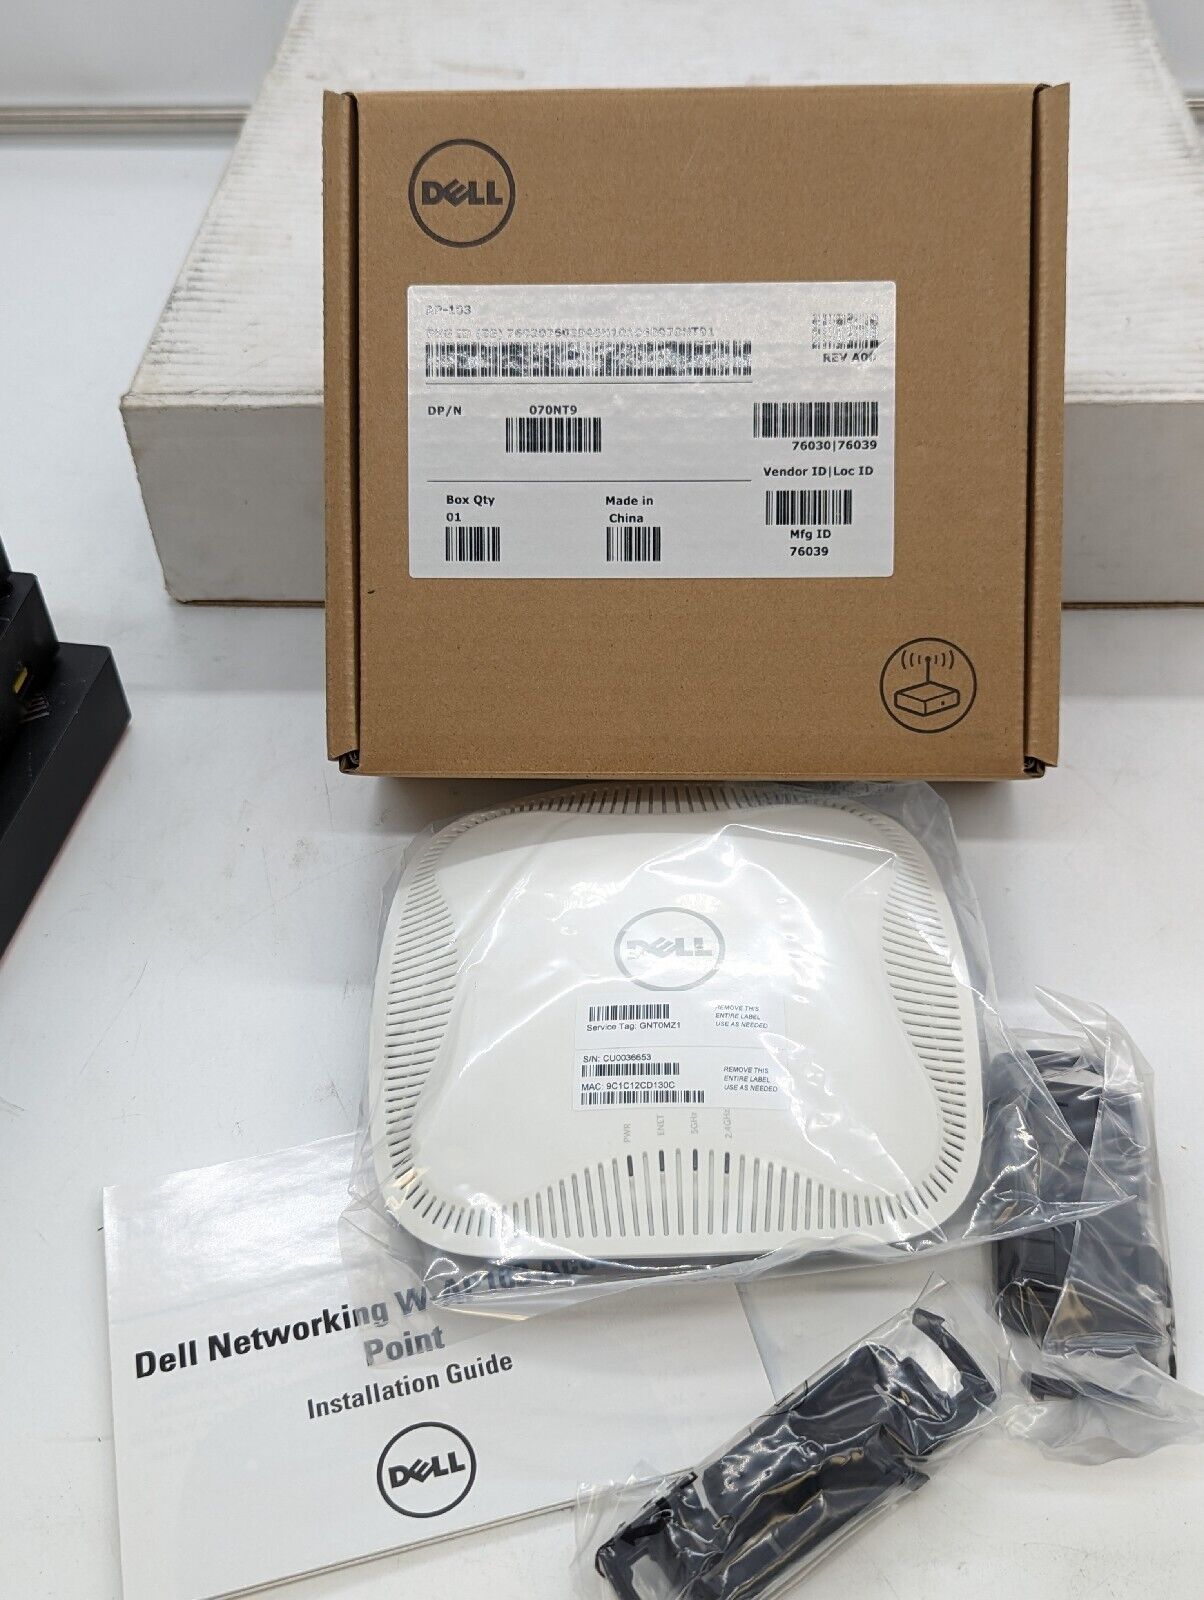 New Dell Networking W-AP103 Access Point 2.4GHz and a 5GHz